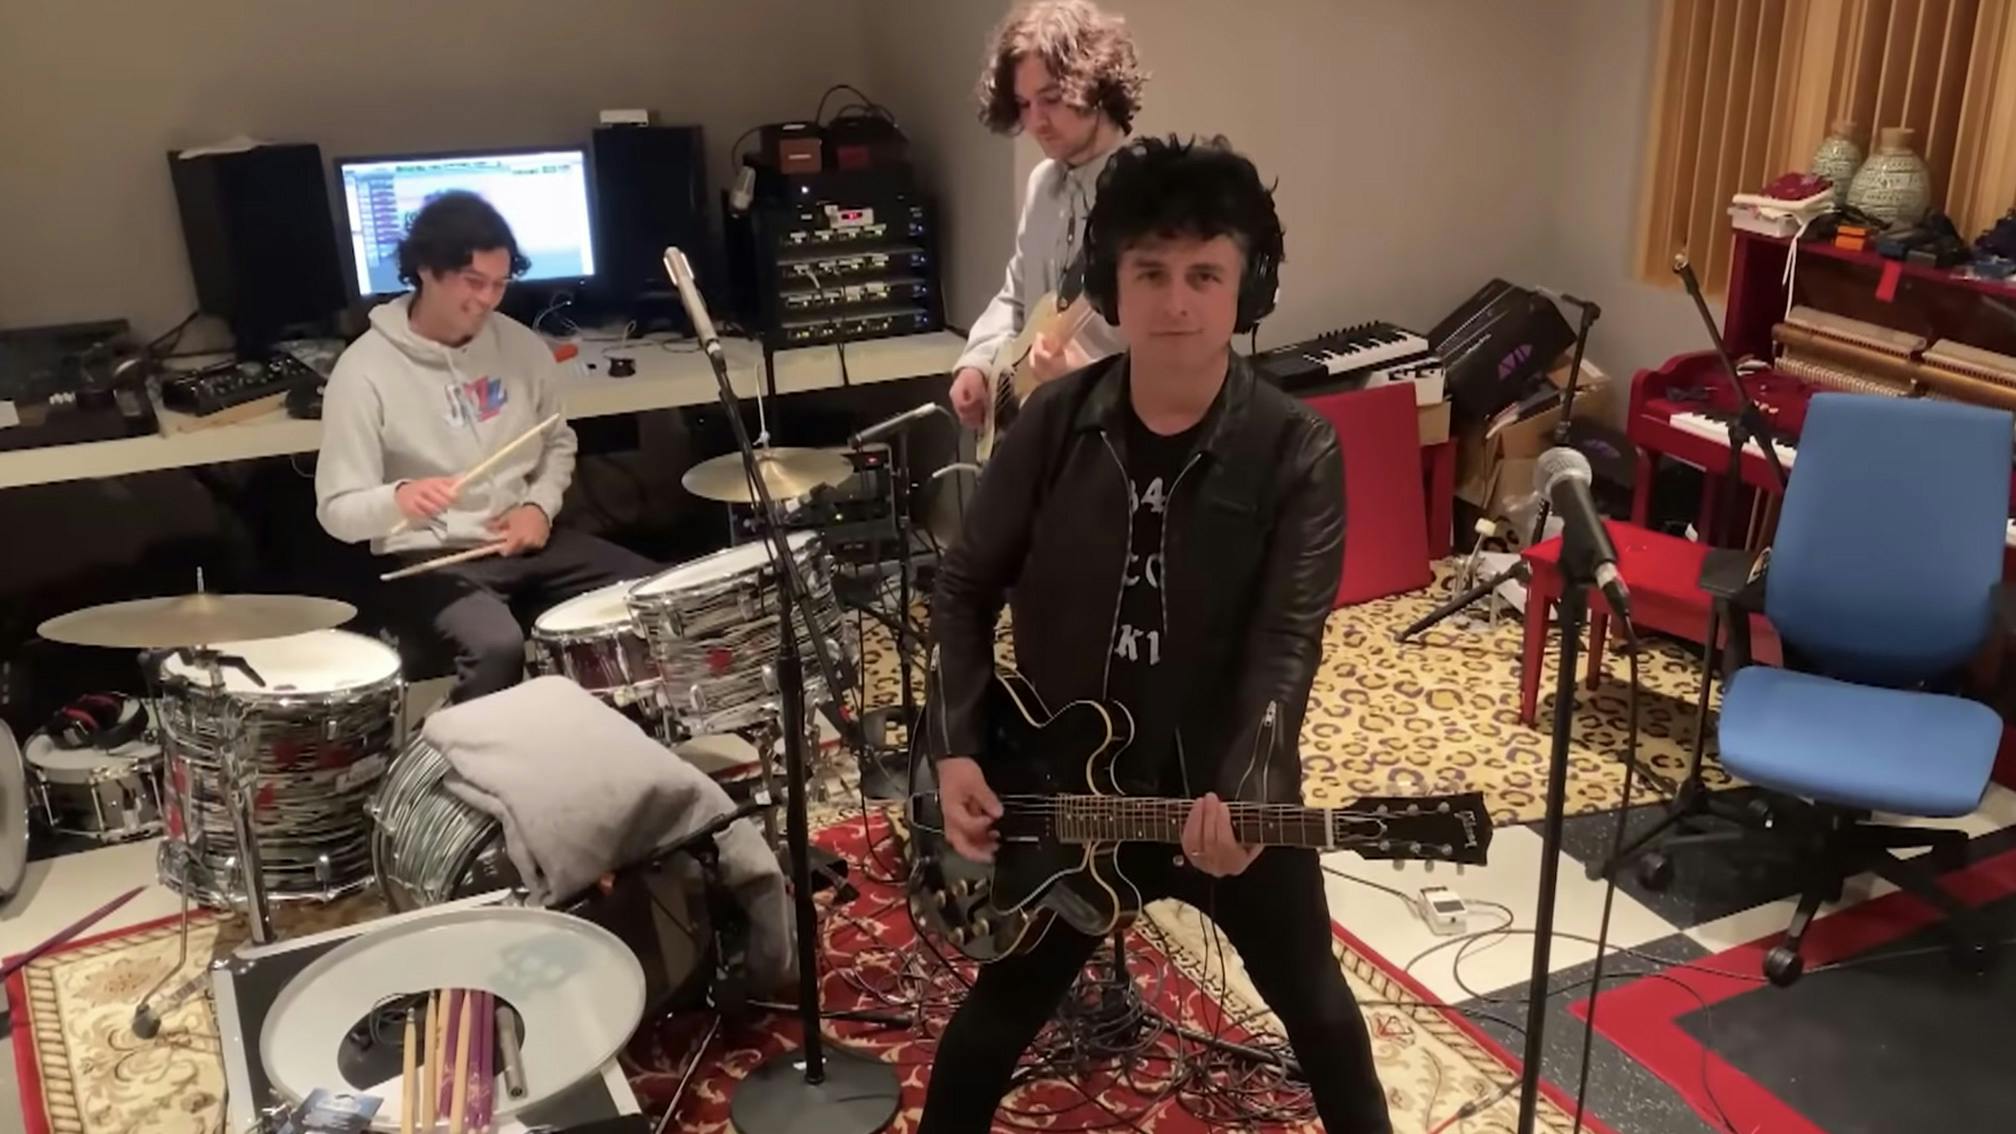 Watch Billie Joe Armstrong Cover I Think We're Alone Now With His Sons, Joey And Jakob